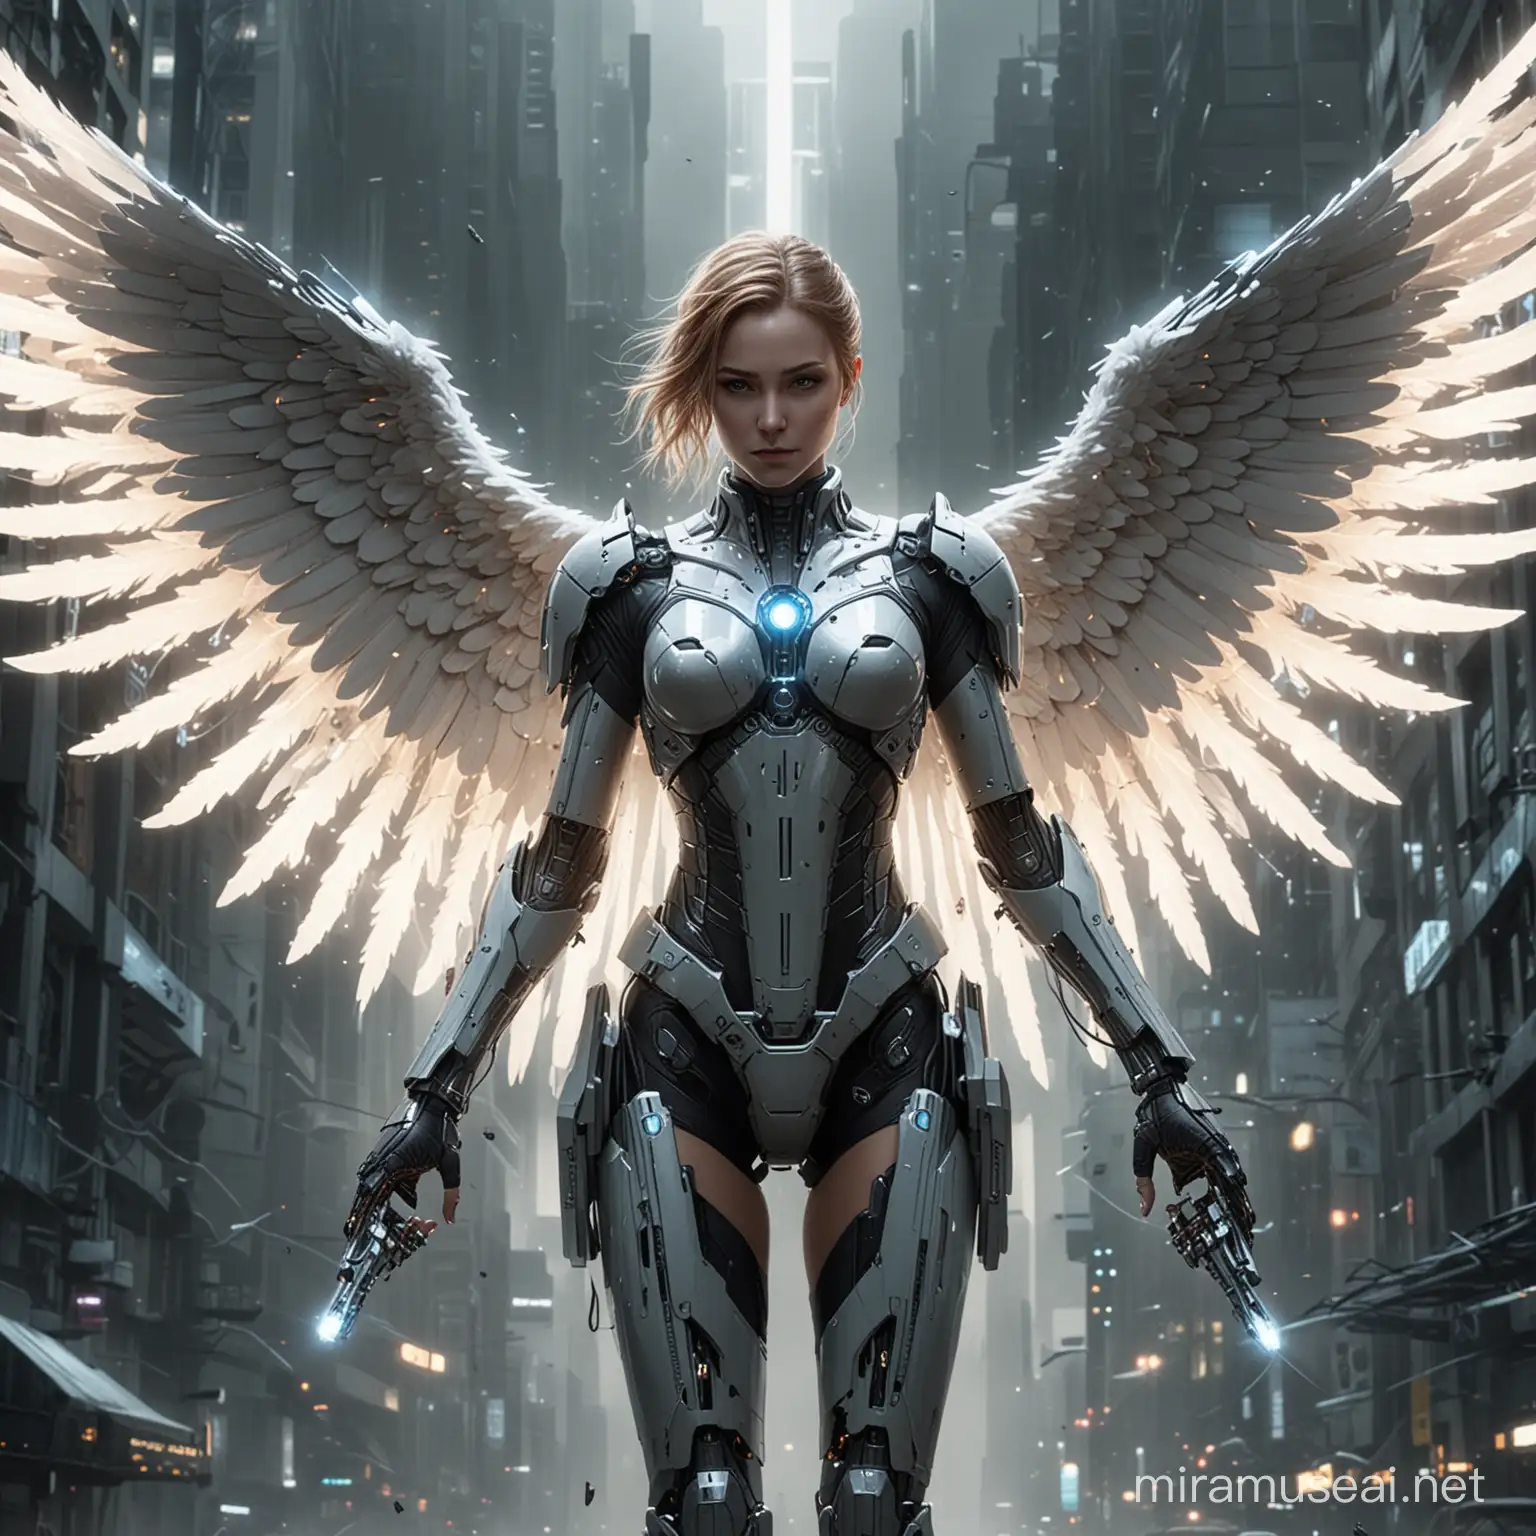 Cybernetic Angels Battle Against Technological Oppression